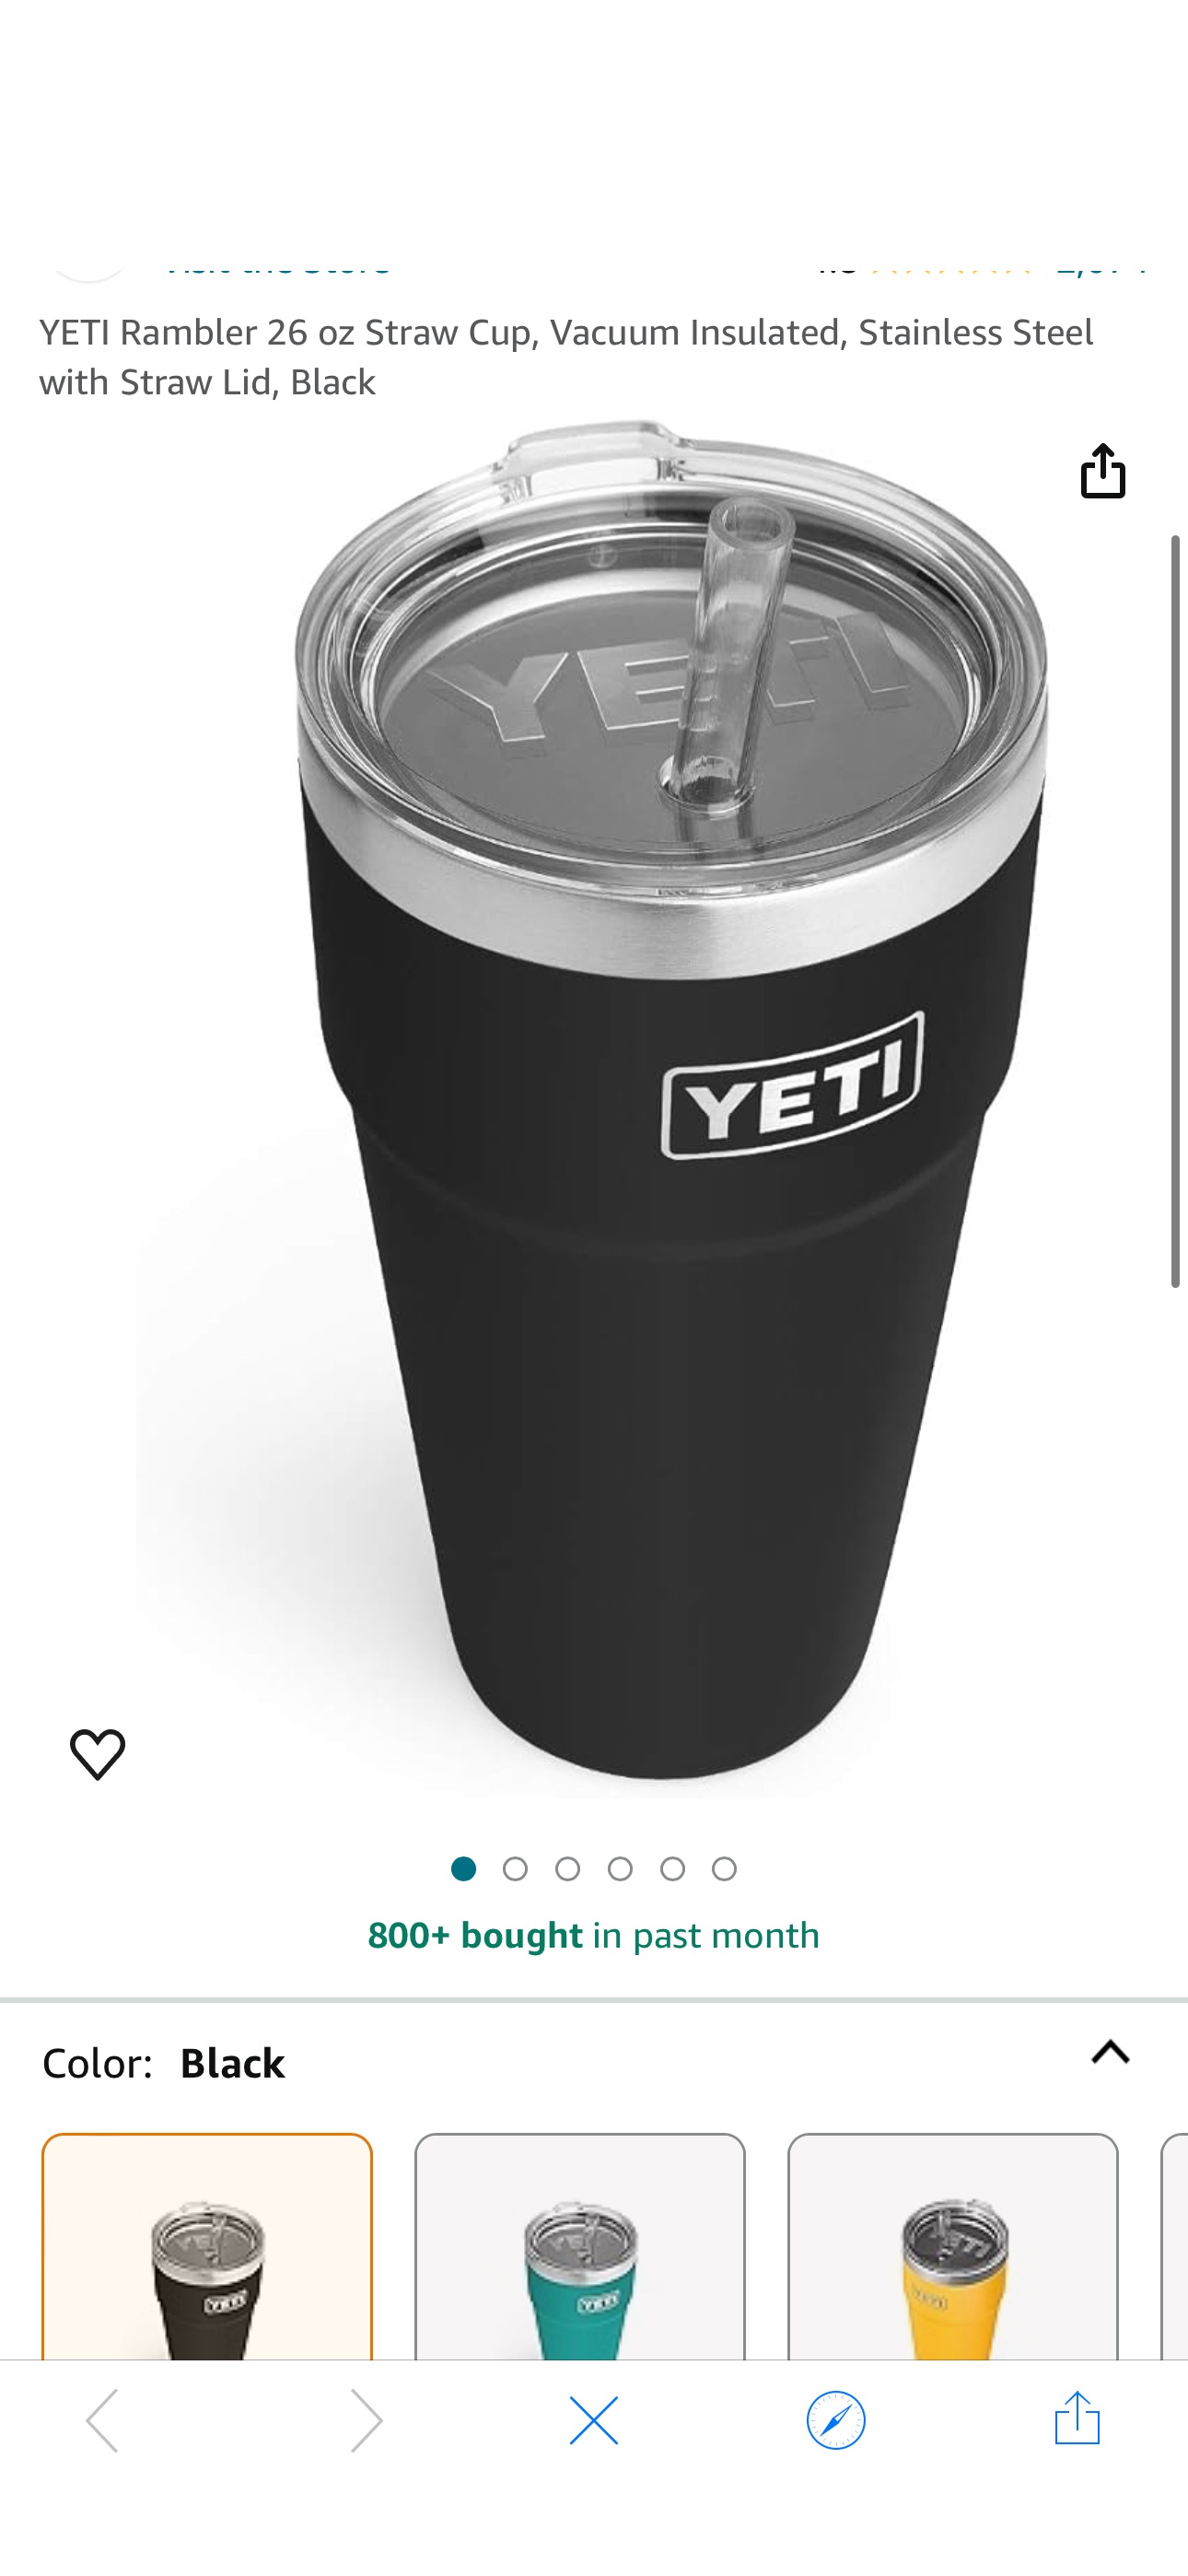 Amazon.com: YETI Rambler 26 oz Straw Cup, Vacuum Insulated, Stainless Steel with Straw Lid, Black : Home & Kitchen